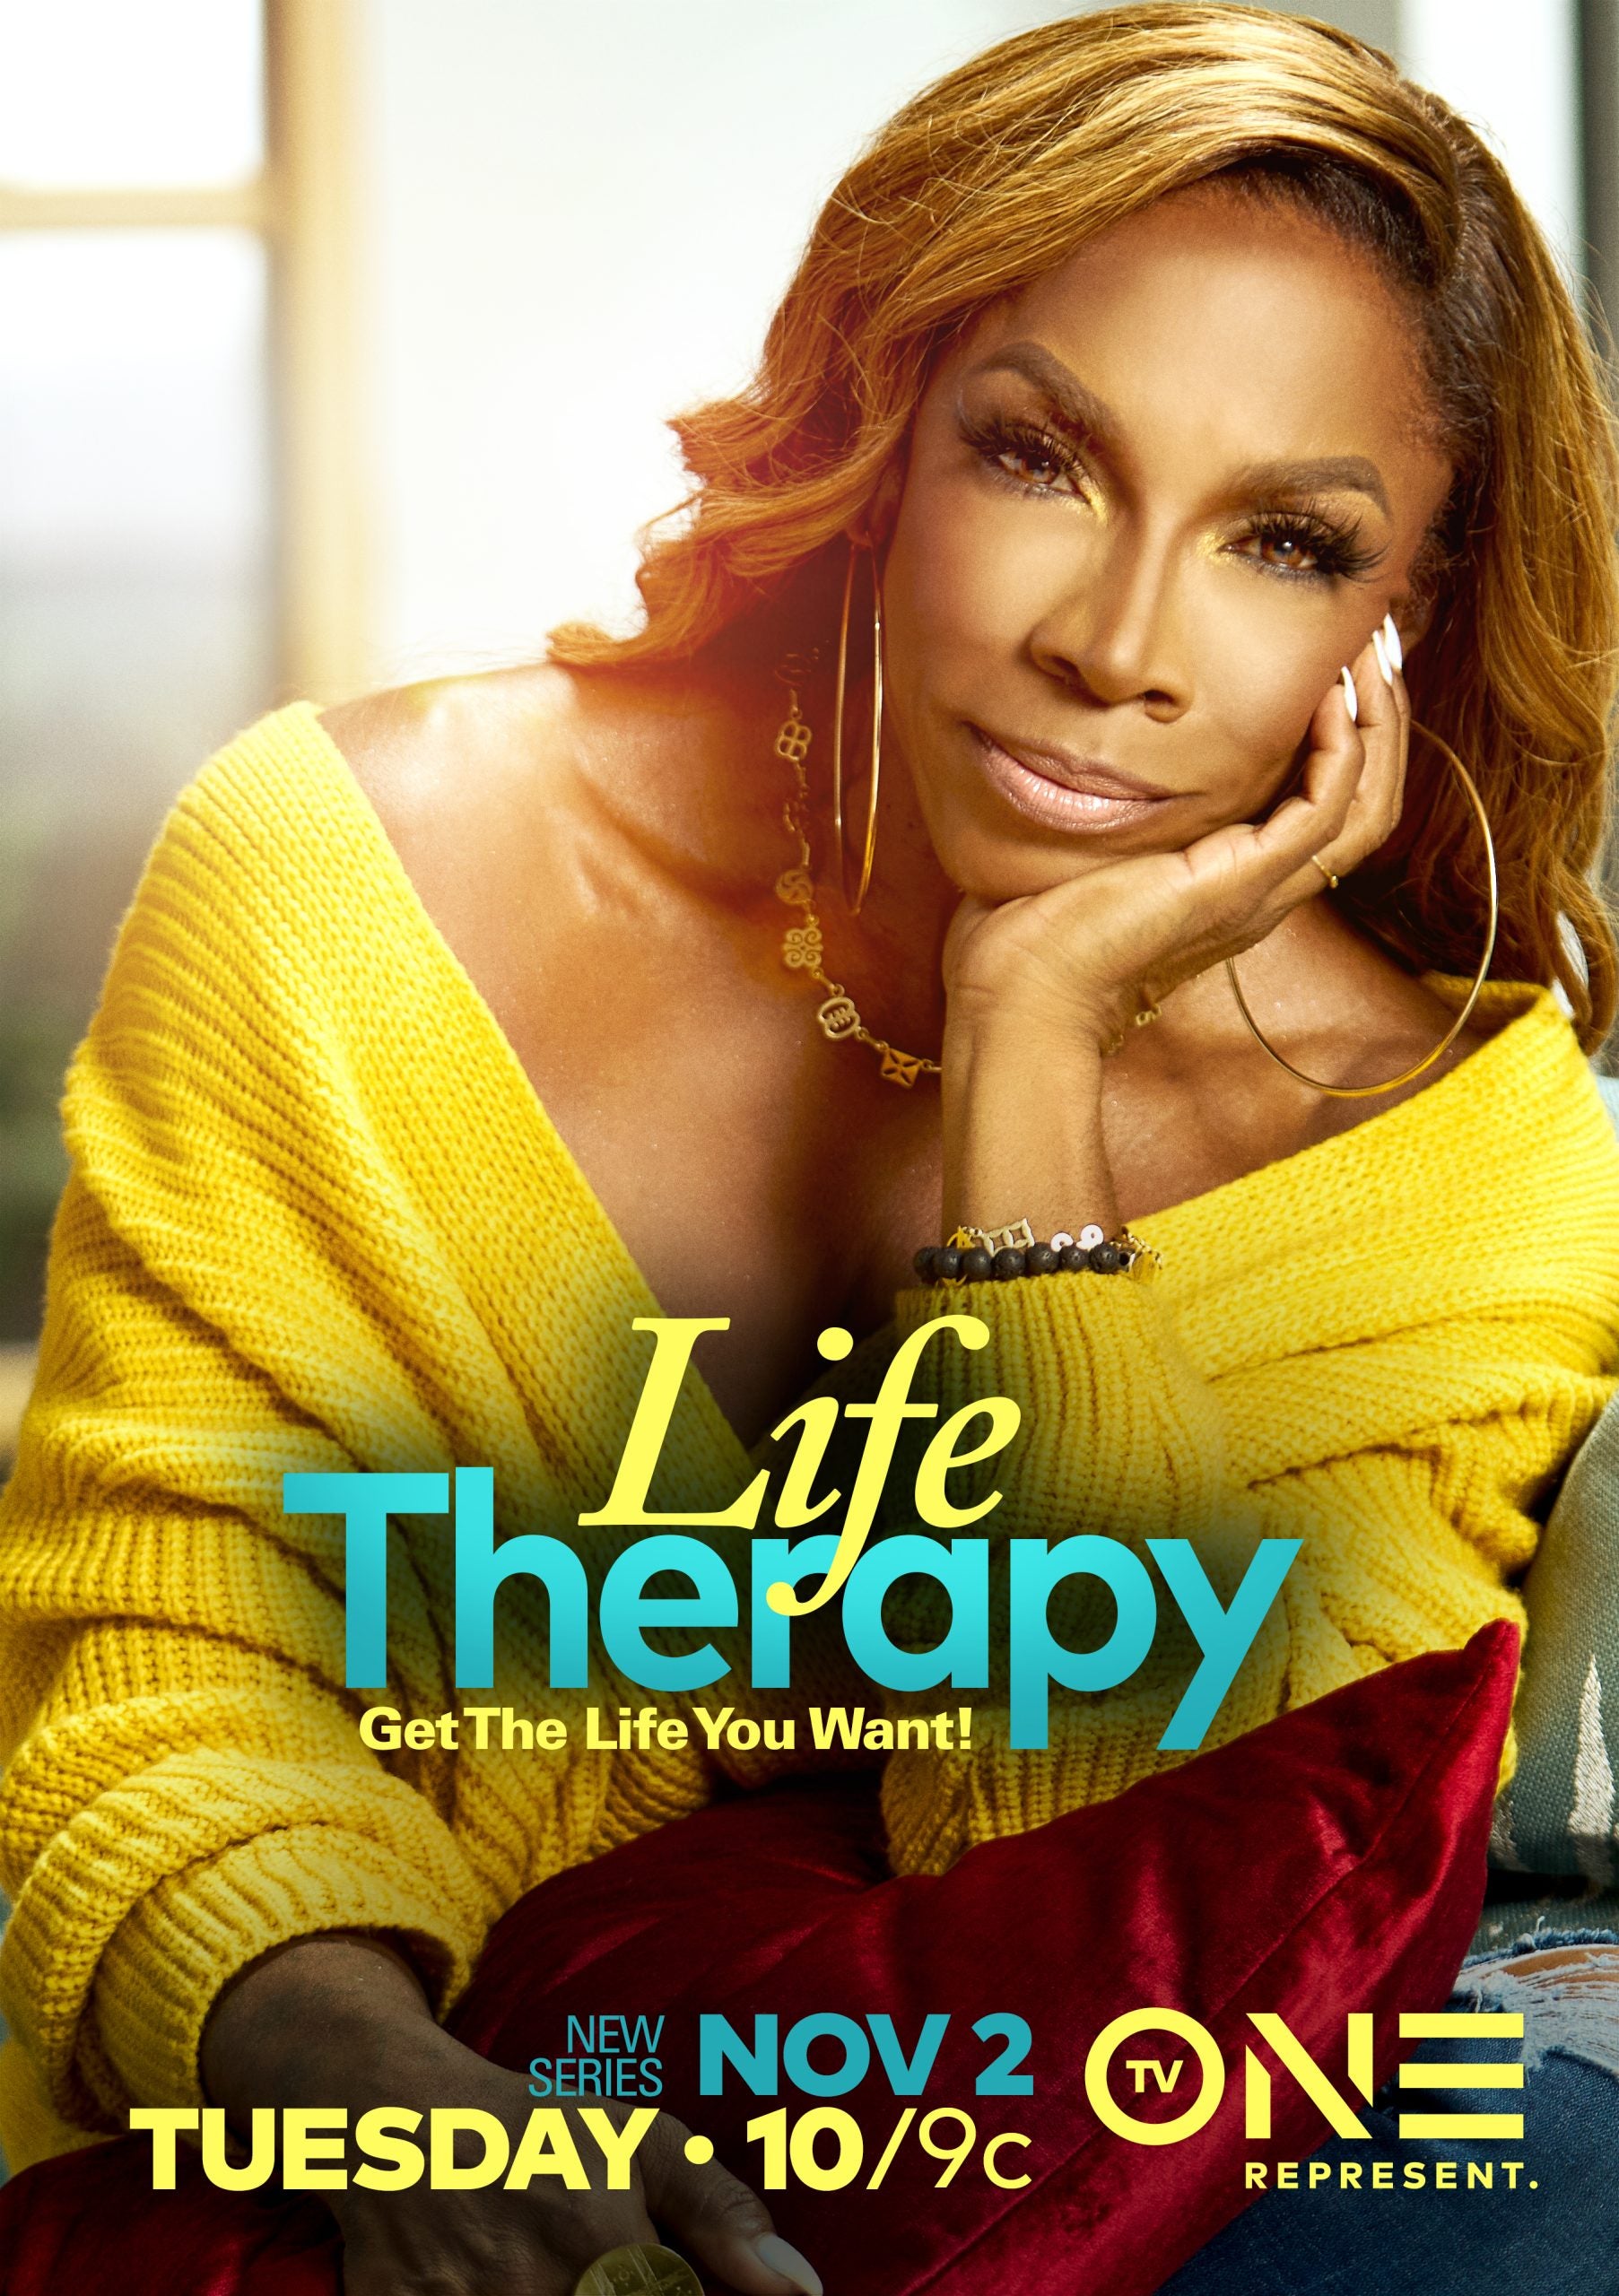 Actress And Wellness Coach AJ Johnson Is Changing Lives With Her New TV One Series 'Life Therapy'